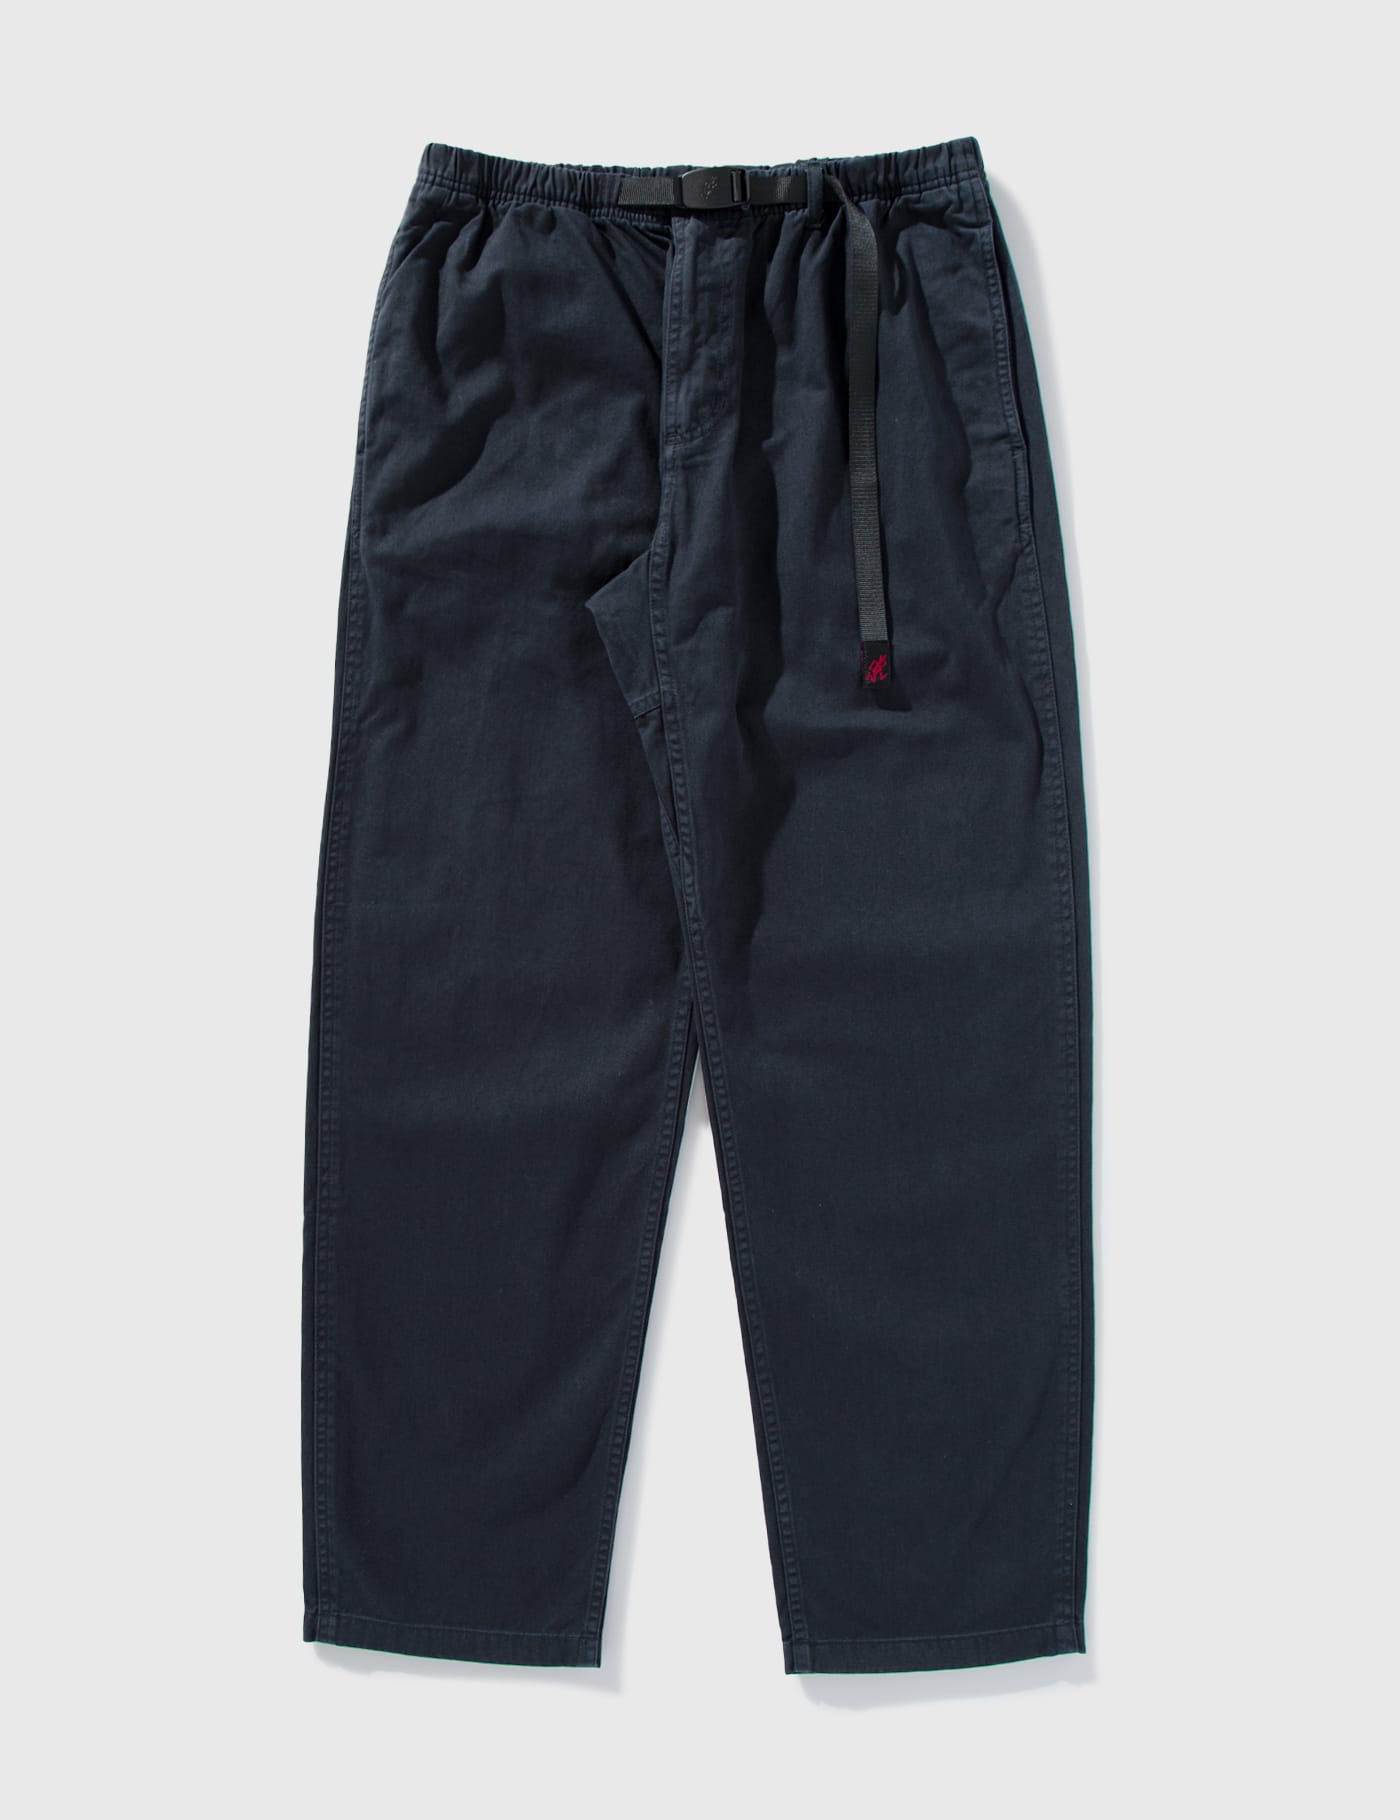 Gramicci - Gramicci Pants | HBX - Globally Curated Fashion and Lifestyle by  Hypebeast